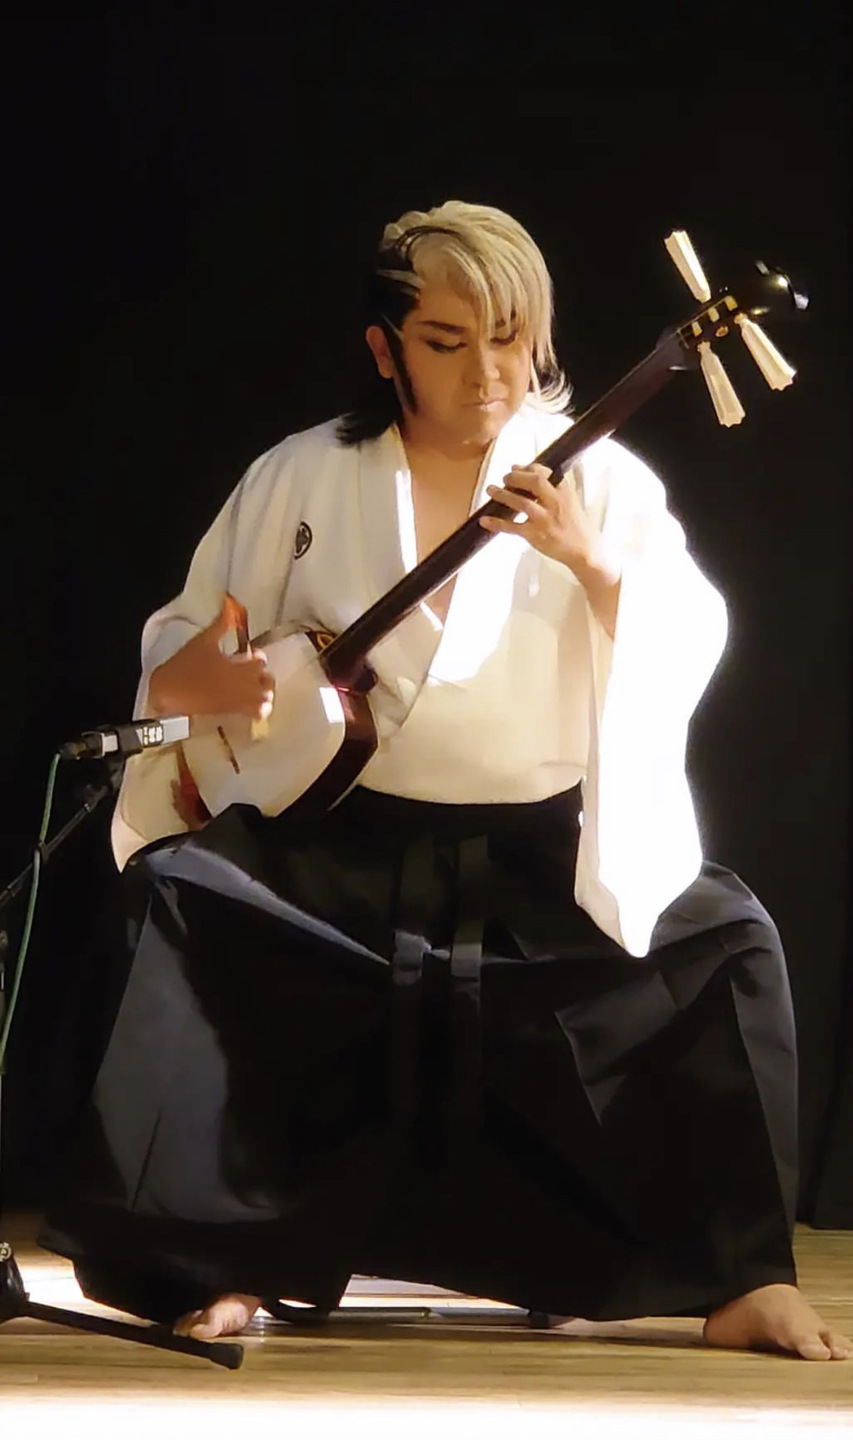 A seated, barefoot performer wearing robes strums a stringed instrument.